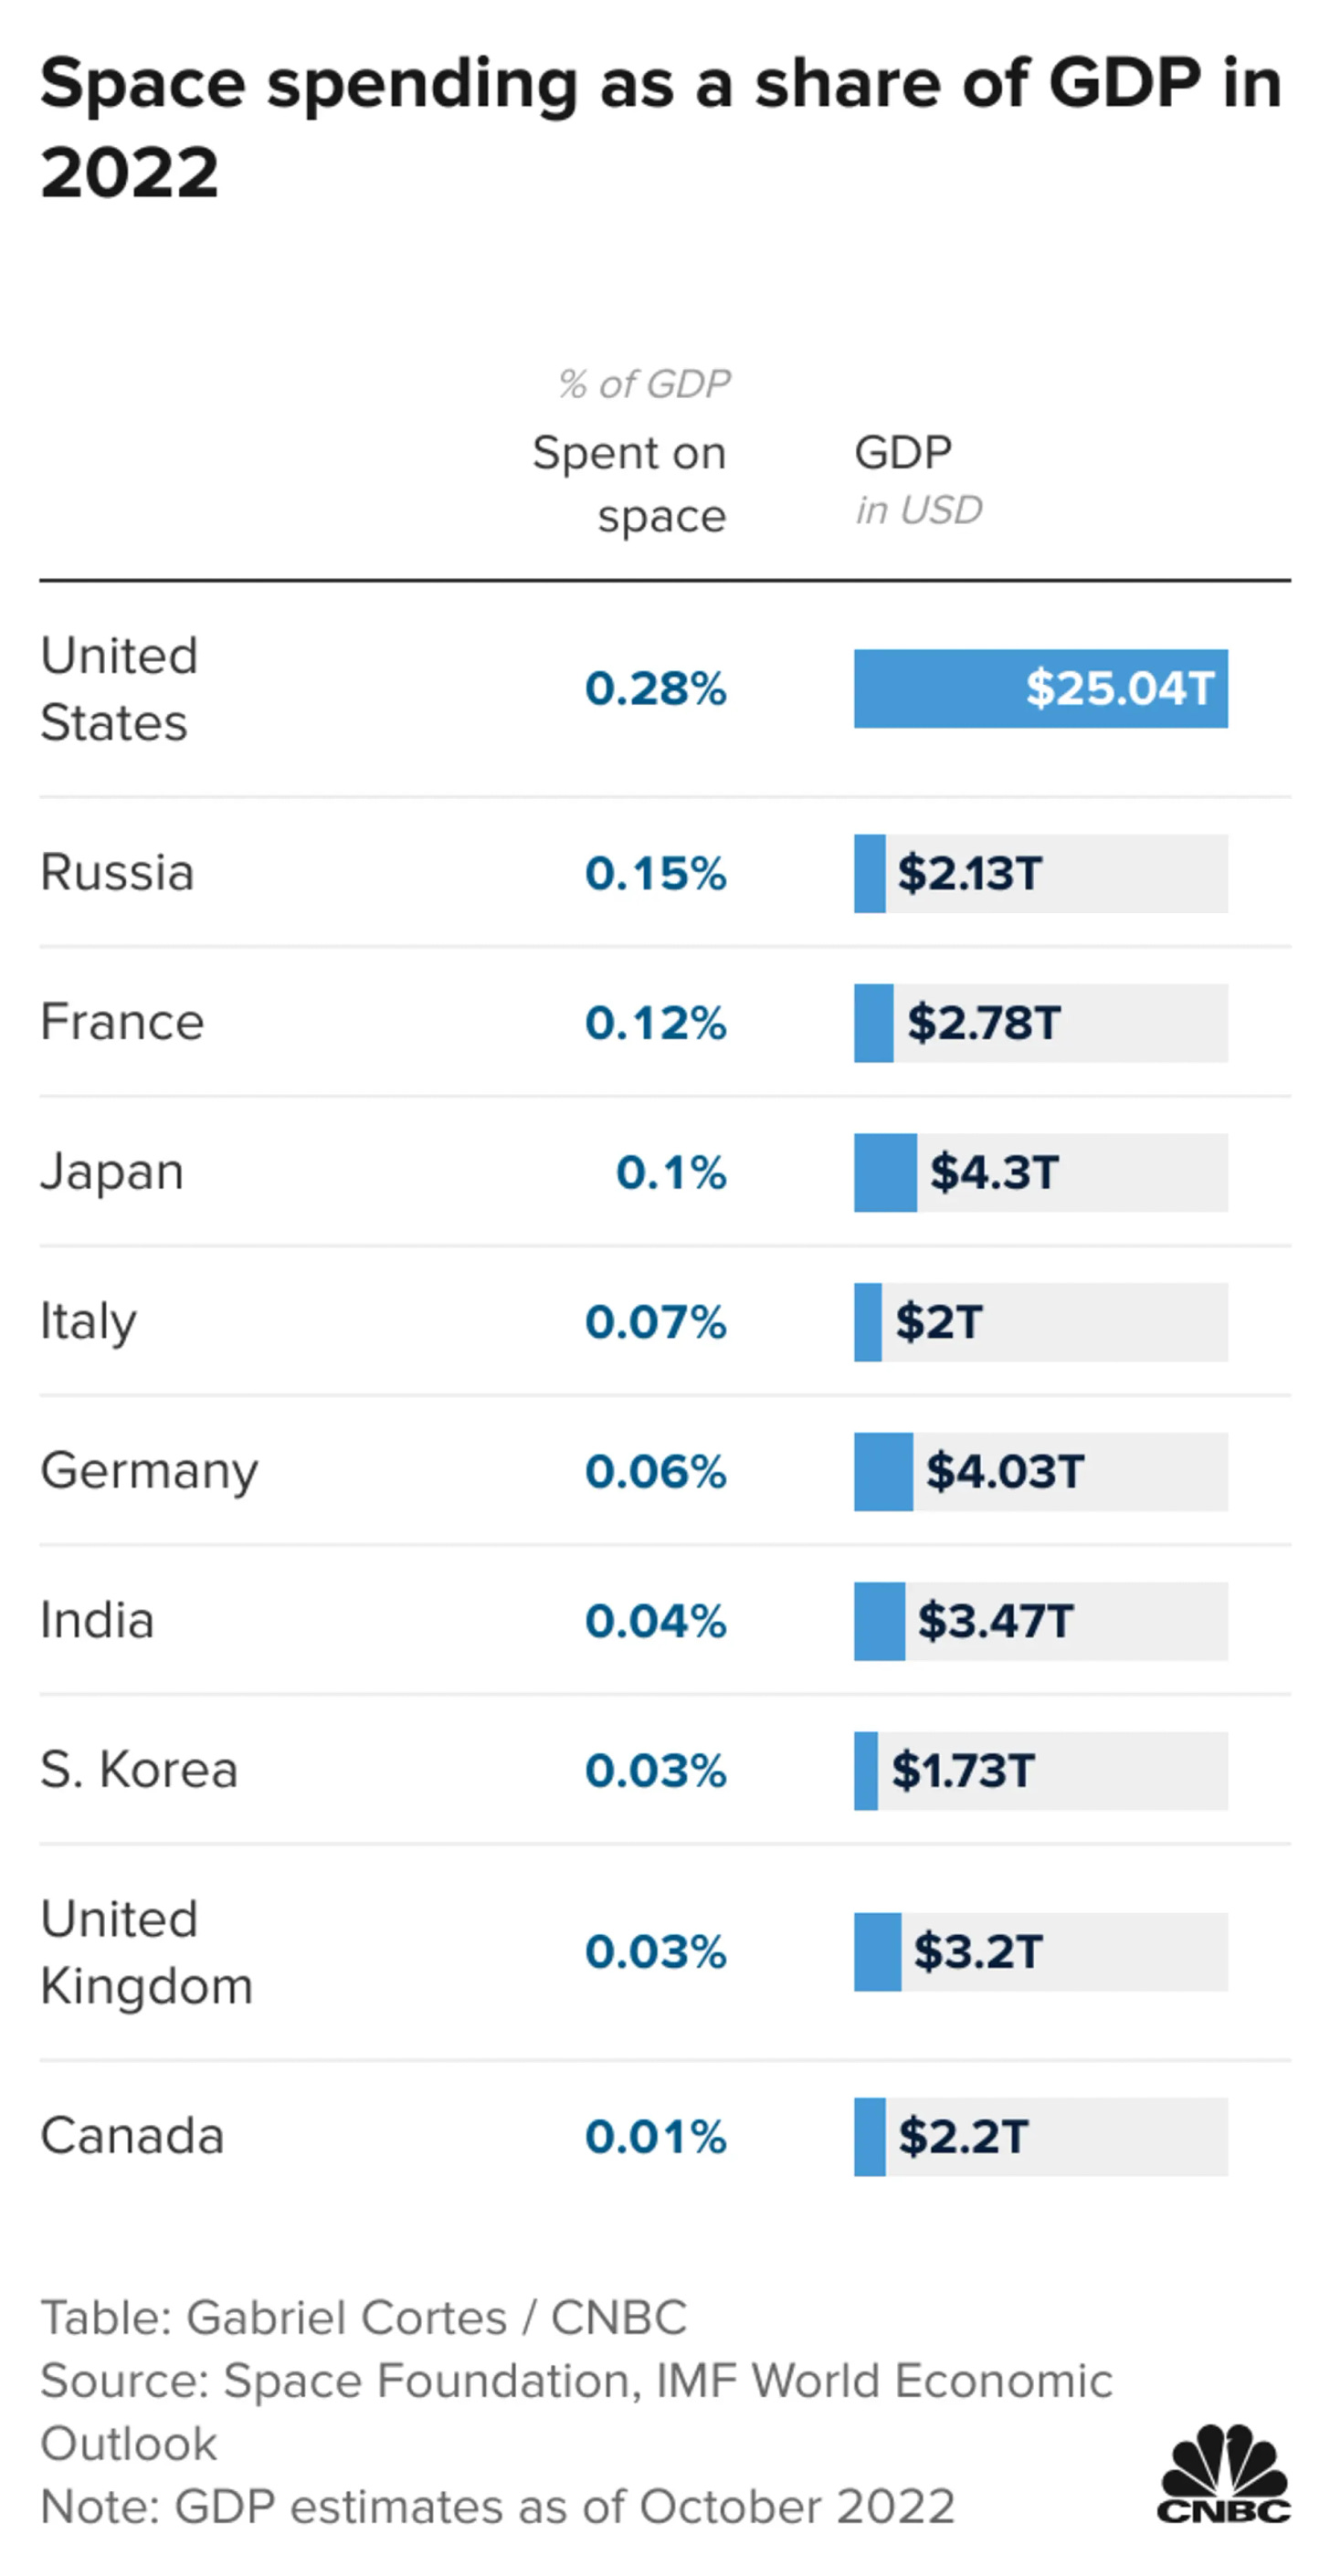 The table shows the countries who spend the highest percentage of their GDP on space as of 2022.